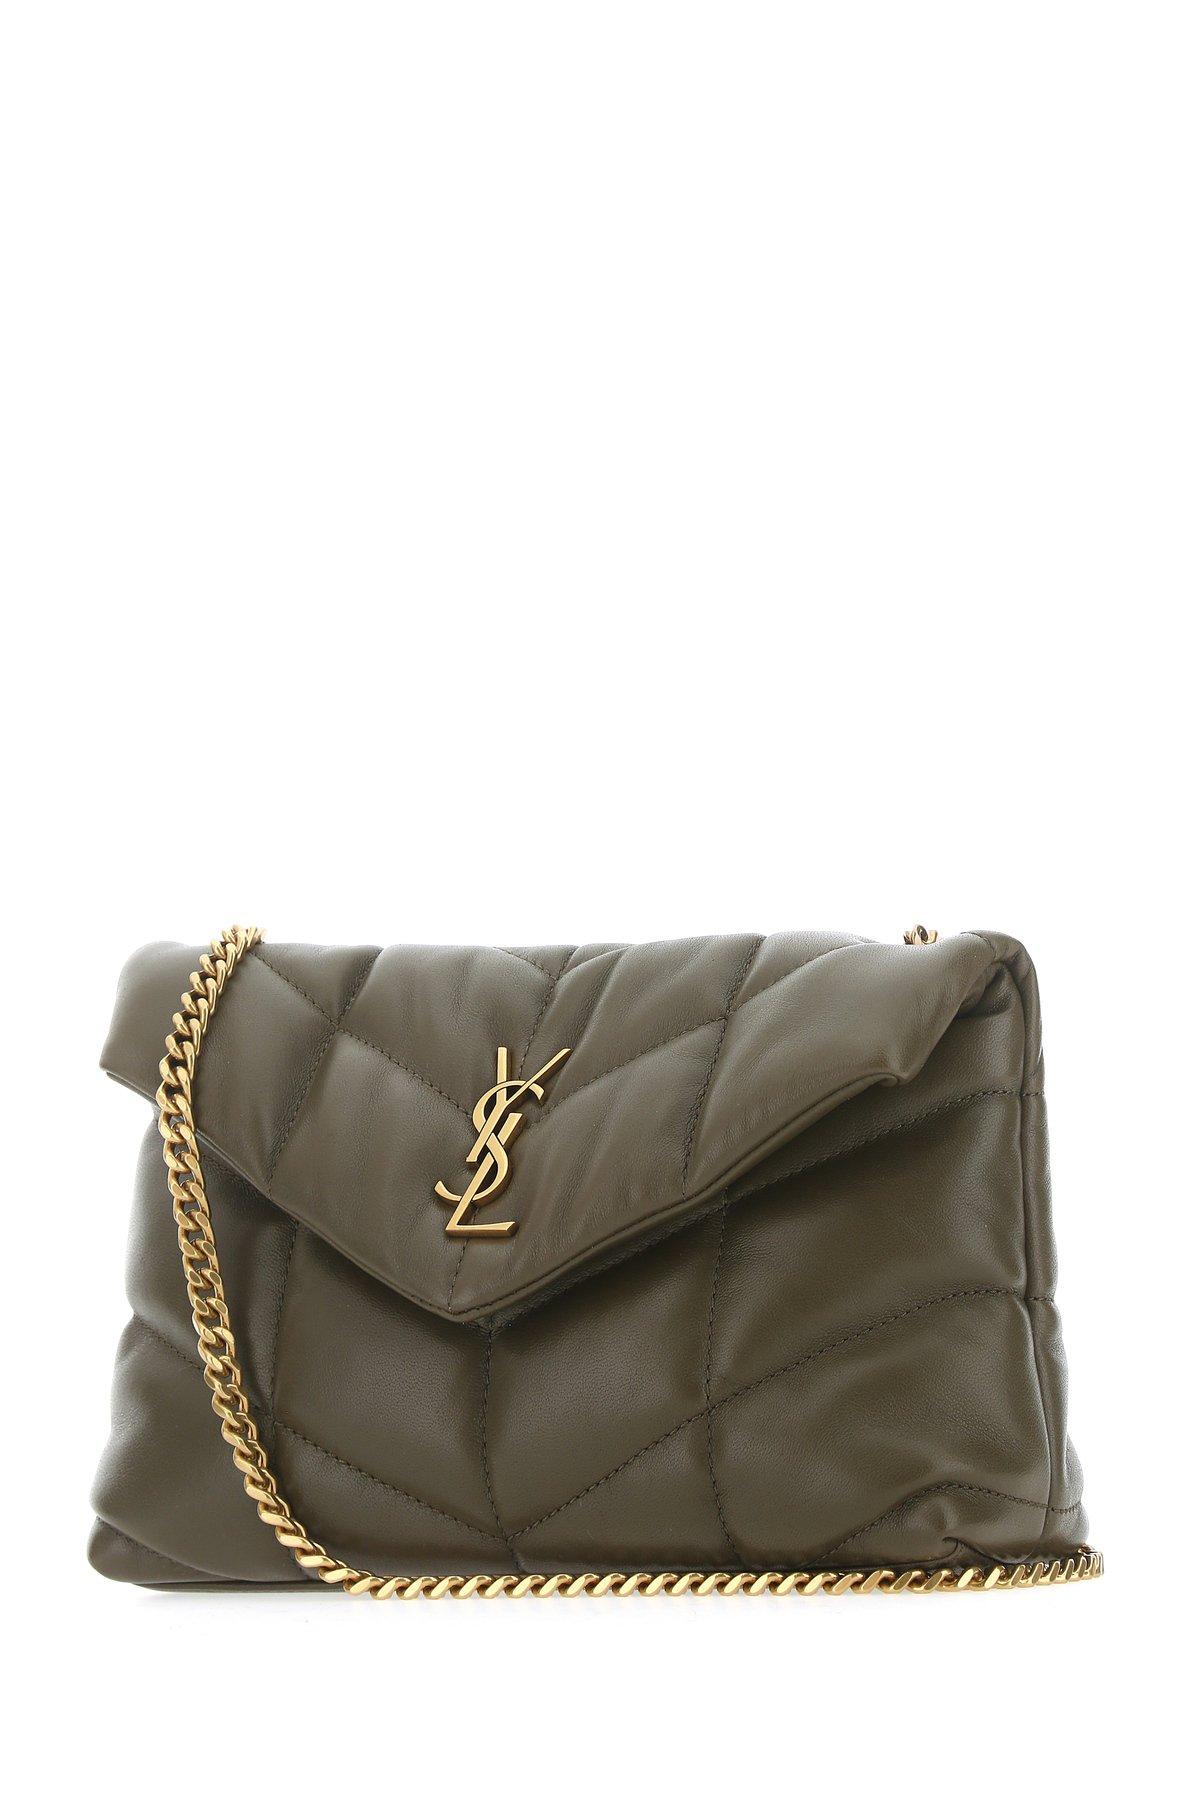 SAINT LAURENT Loulou Puffer small quilted leather shoulder bag